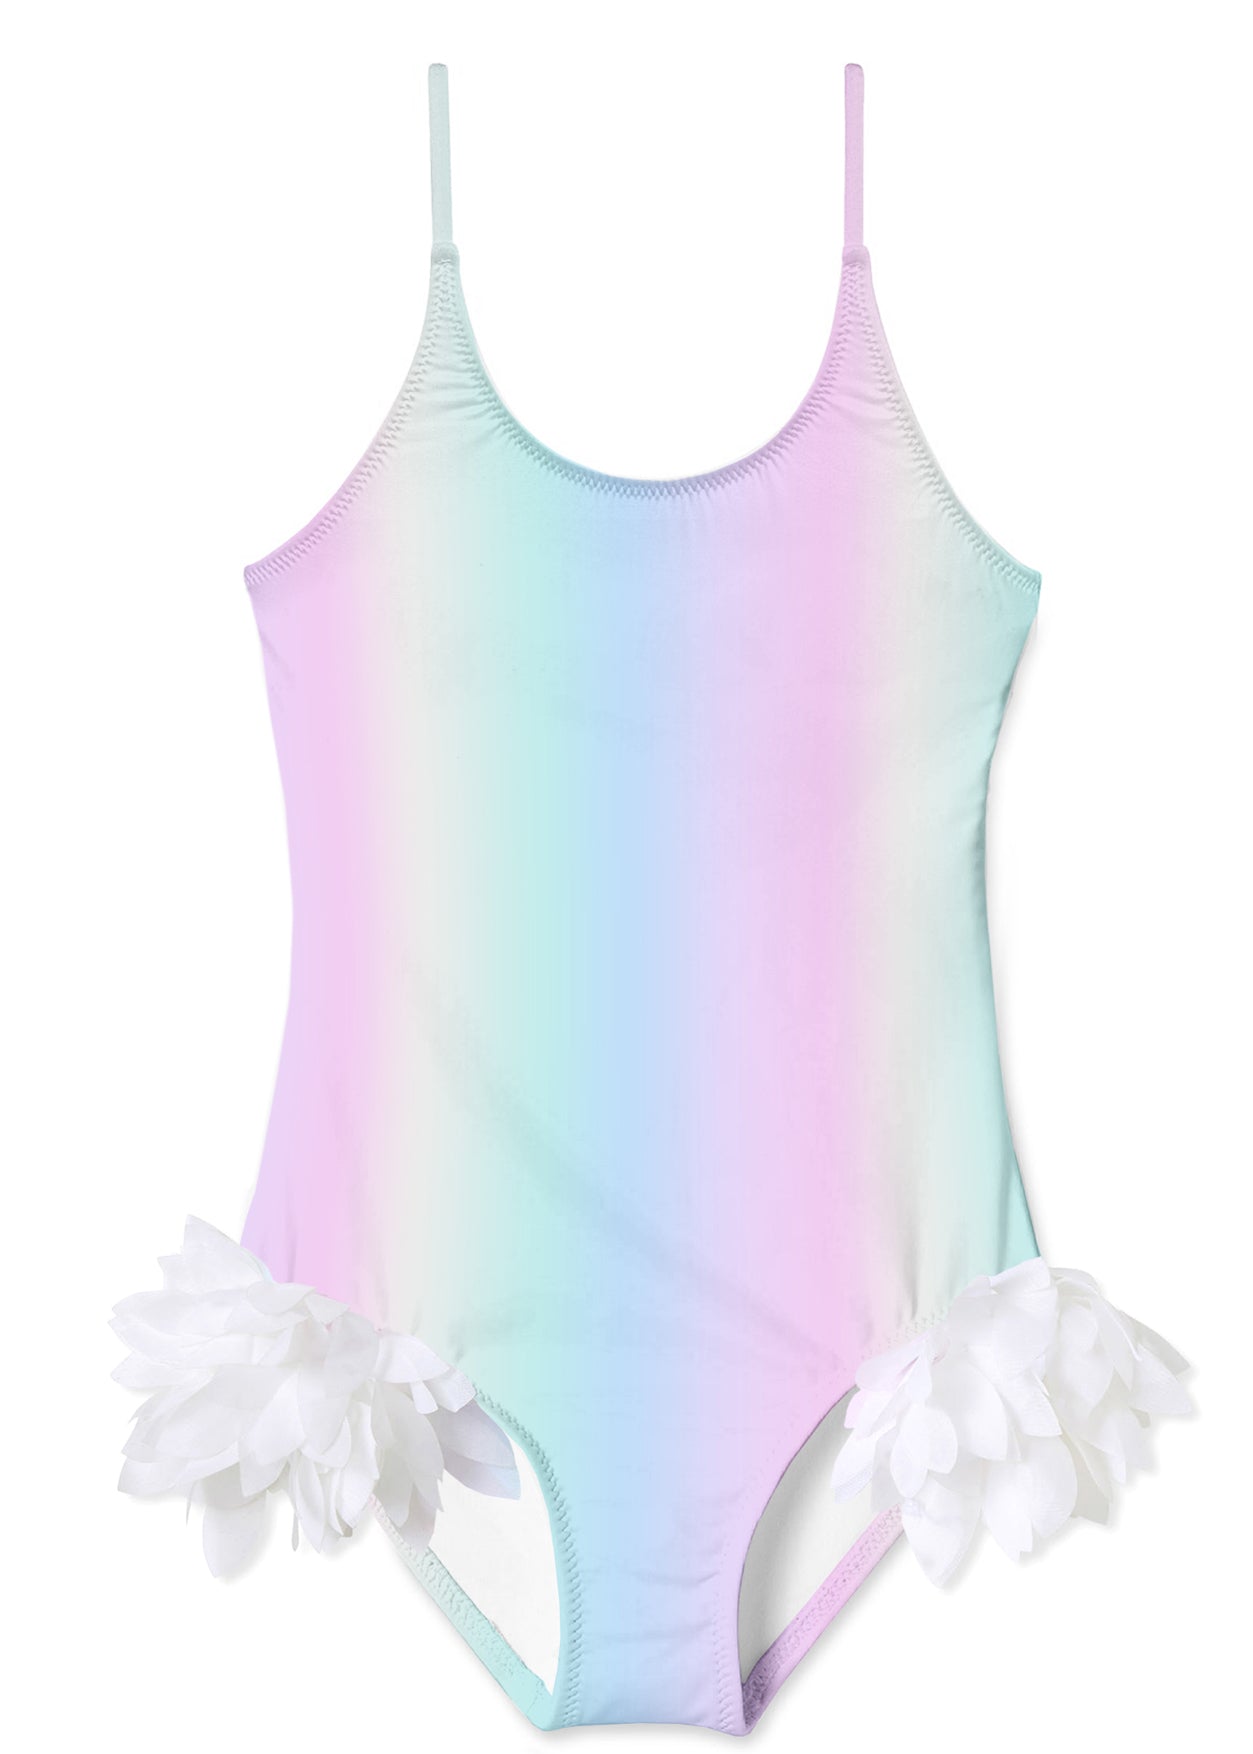 Rainbow Swimsuit with Petals